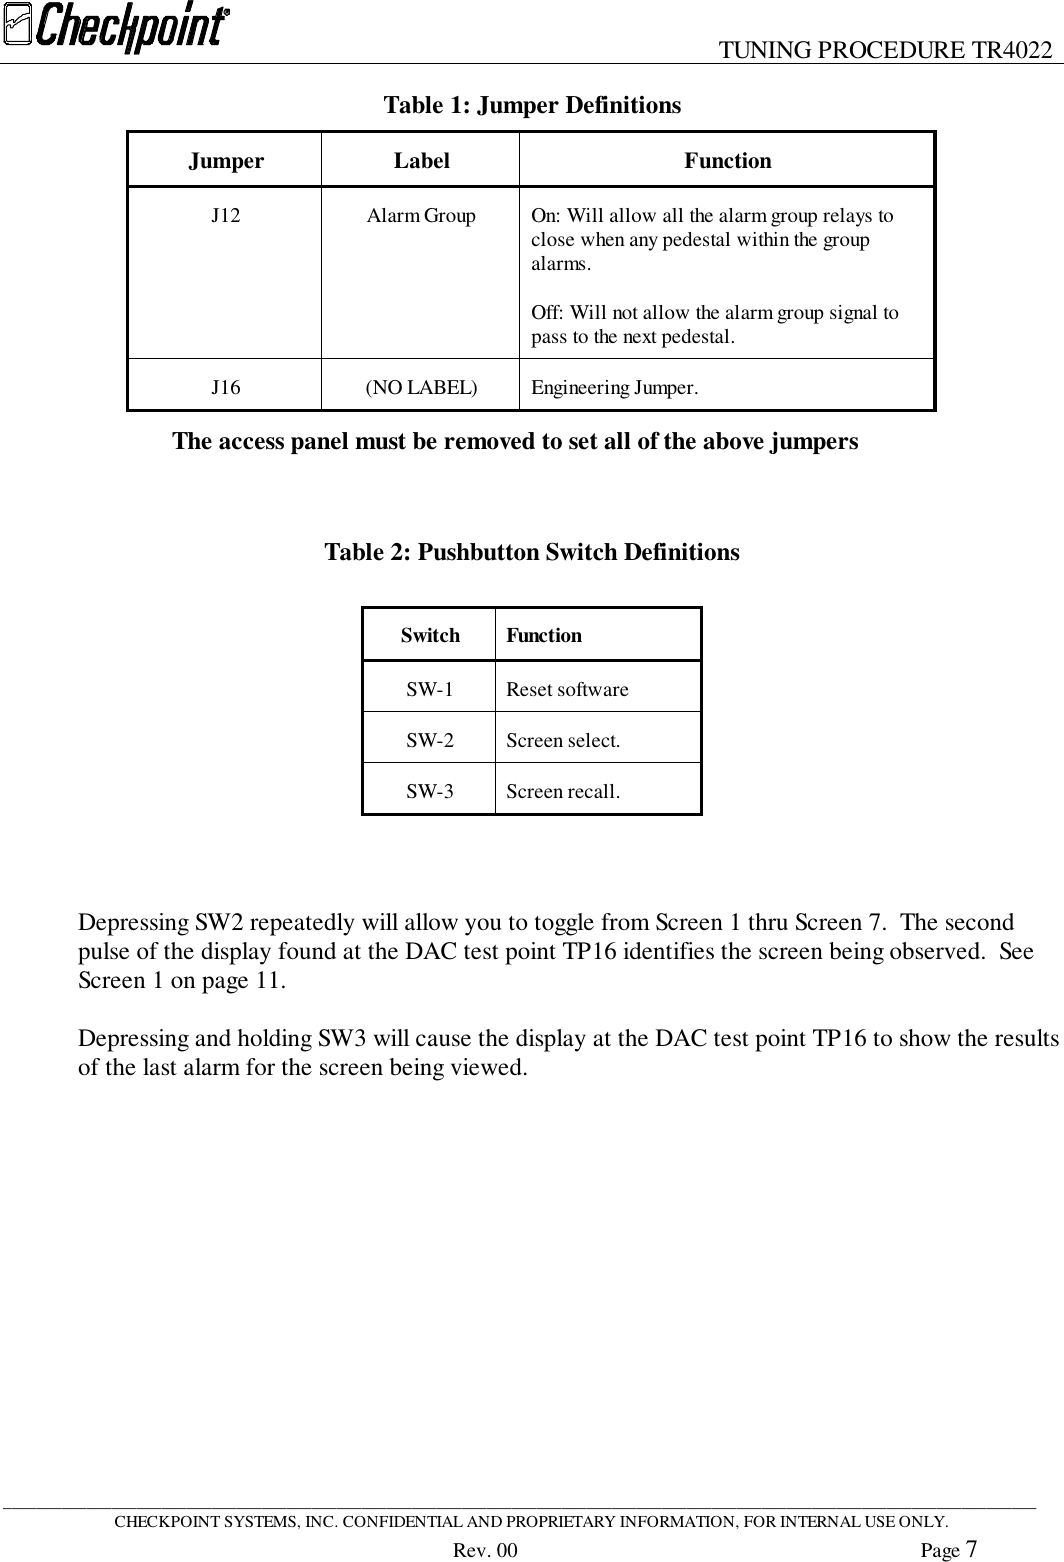 TUNING PROCEDURE TR4022____________________________________________________________________________________________________________________________CHECKPOINT SYSTEMS, INC. CONFIDENTIAL AND PROPRIETARY INFORMATION, FOR INTERNAL USE ONLY.Rev. 00 Page 7Table 1: Jumper DefinitionsJumper Label FunctionJ12 Alarm Group On: Will allow all the alarm group relays toclose when any pedestal within the groupalarms.Off: Will not allow the alarm group signal topass to the next pedestal.J16 (NO LABEL) Engineering Jumper.   The access panel must be removed to set all of the above jumpersTable 2: Pushbutton Switch DefinitionsSwitch FunctionSW-1 Reset softwareSW-2 Screen select.SW-3 Screen recall.Depressing SW2 repeatedly will allow you to toggle from Screen 1 thru Screen 7.  The secondpulse of the display found at the DAC test point TP16 identifies the screen being observed.  SeeScreen 1 on page 11.Depressing and holding SW3 will cause the display at the DAC test point TP16 to show the resultsof the last alarm for the screen being viewed.